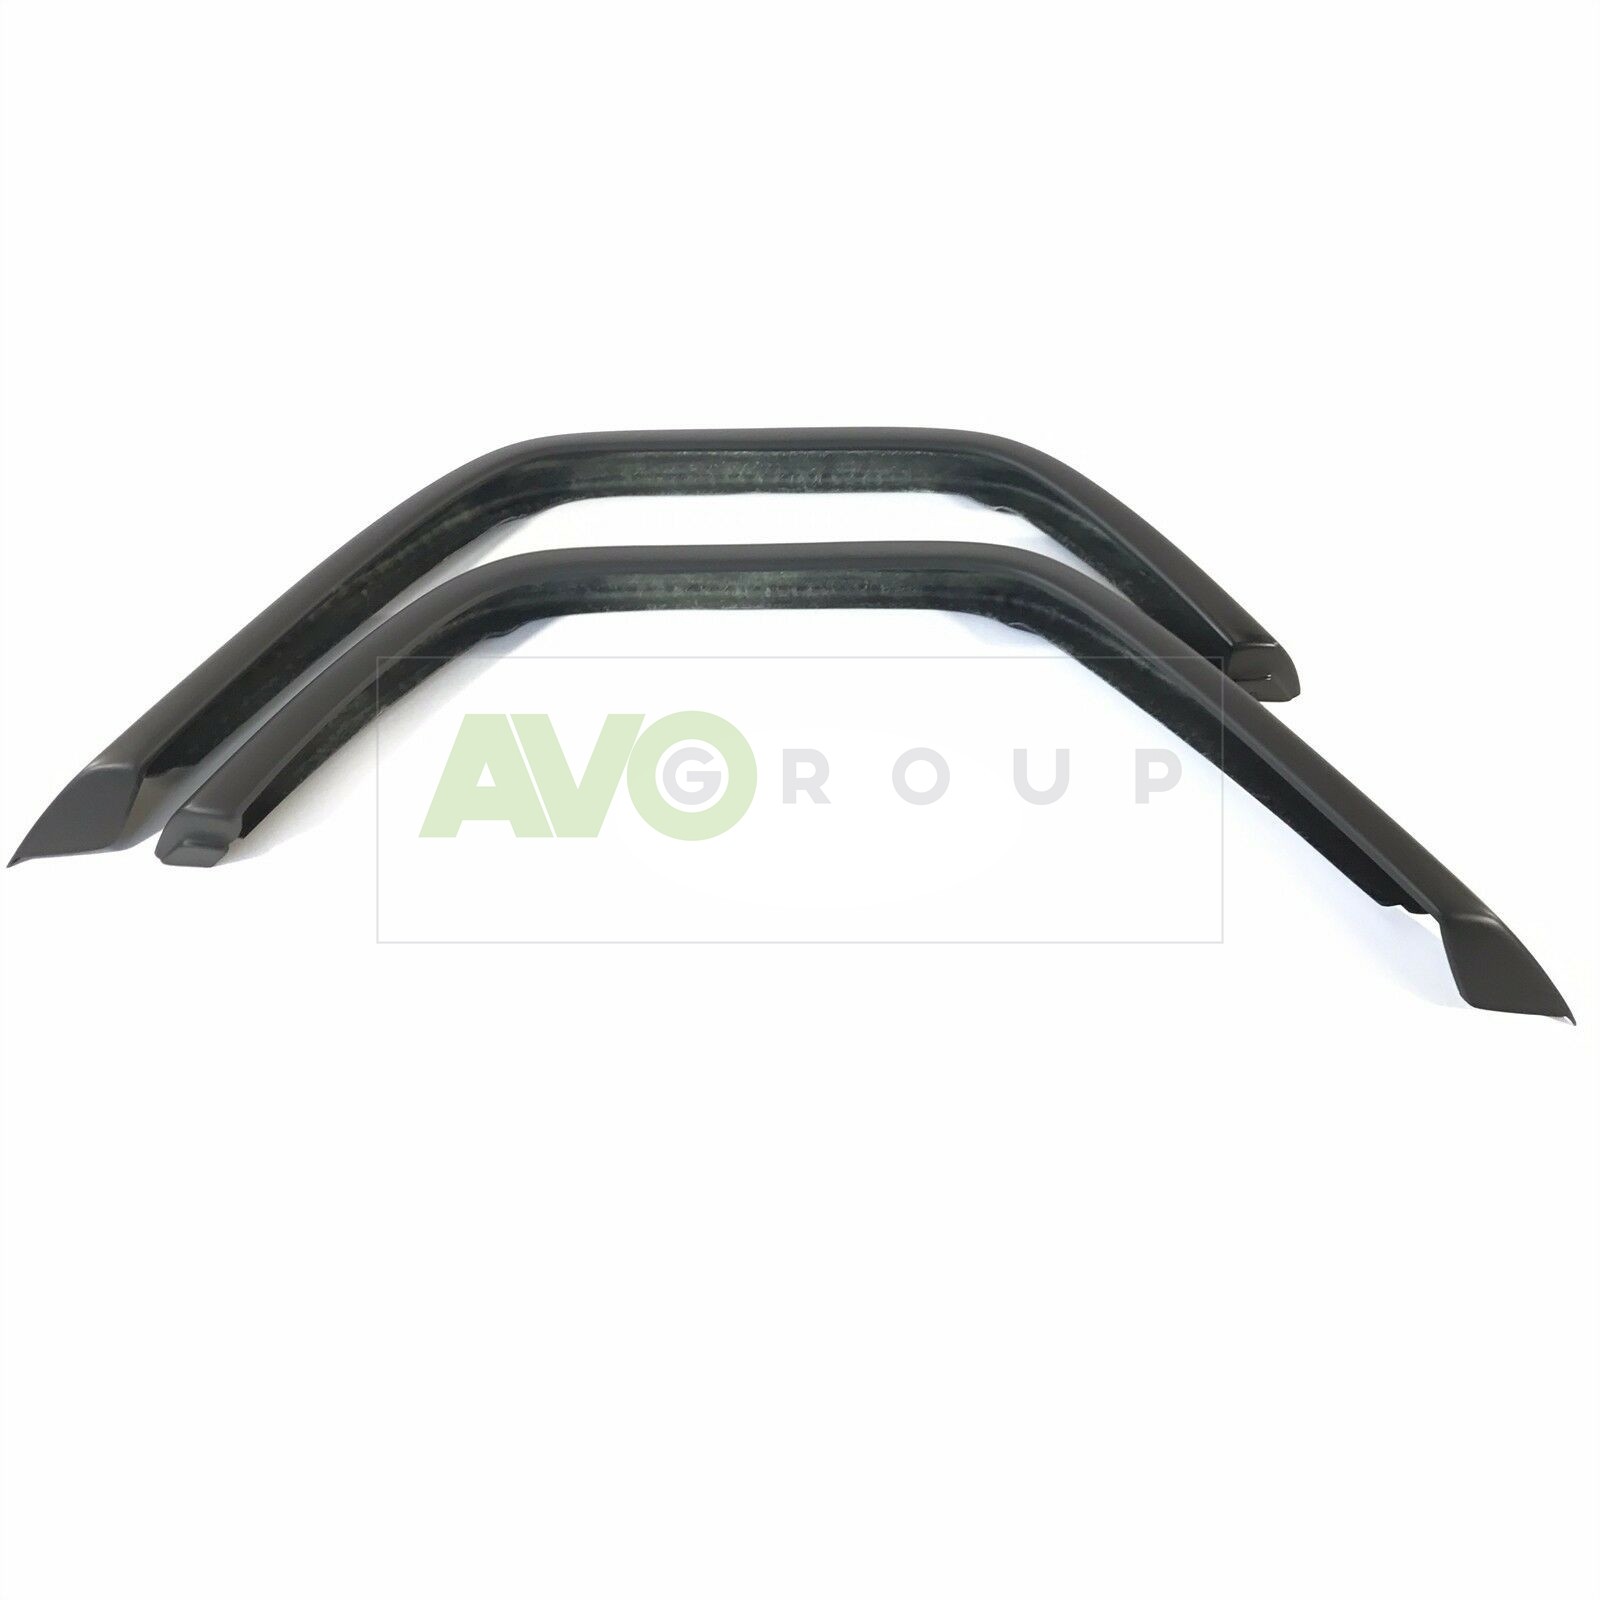 Wheel Arches Fender Flares for MB G Class AMG W463 G500 2002-2014